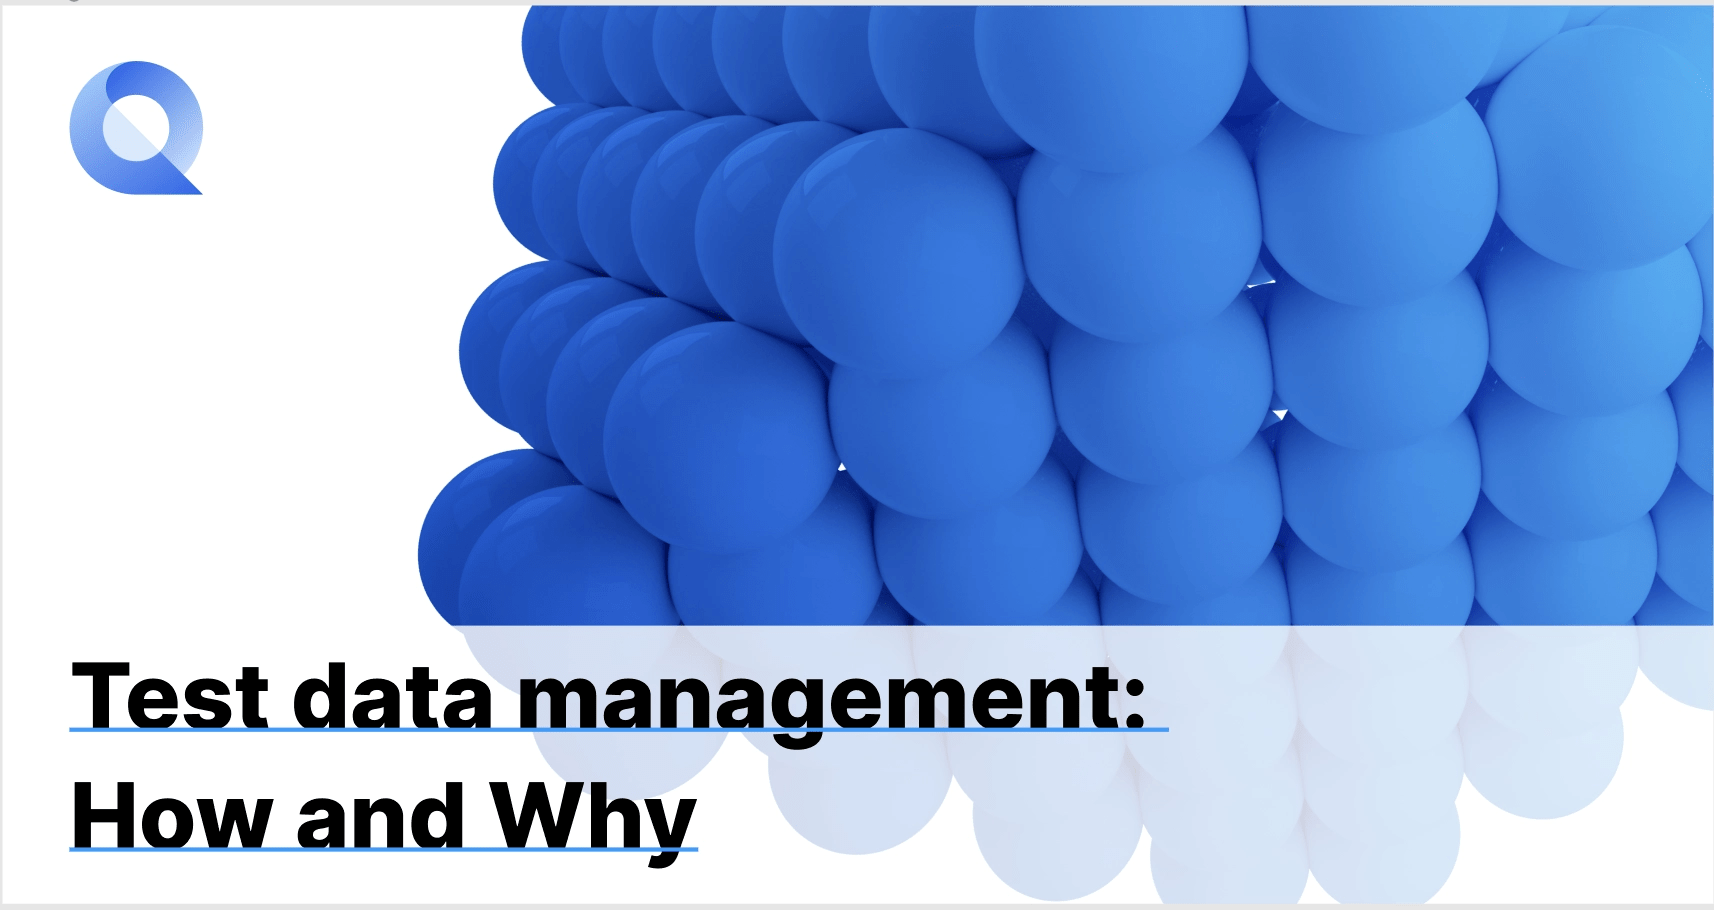 Test data management. How and Why